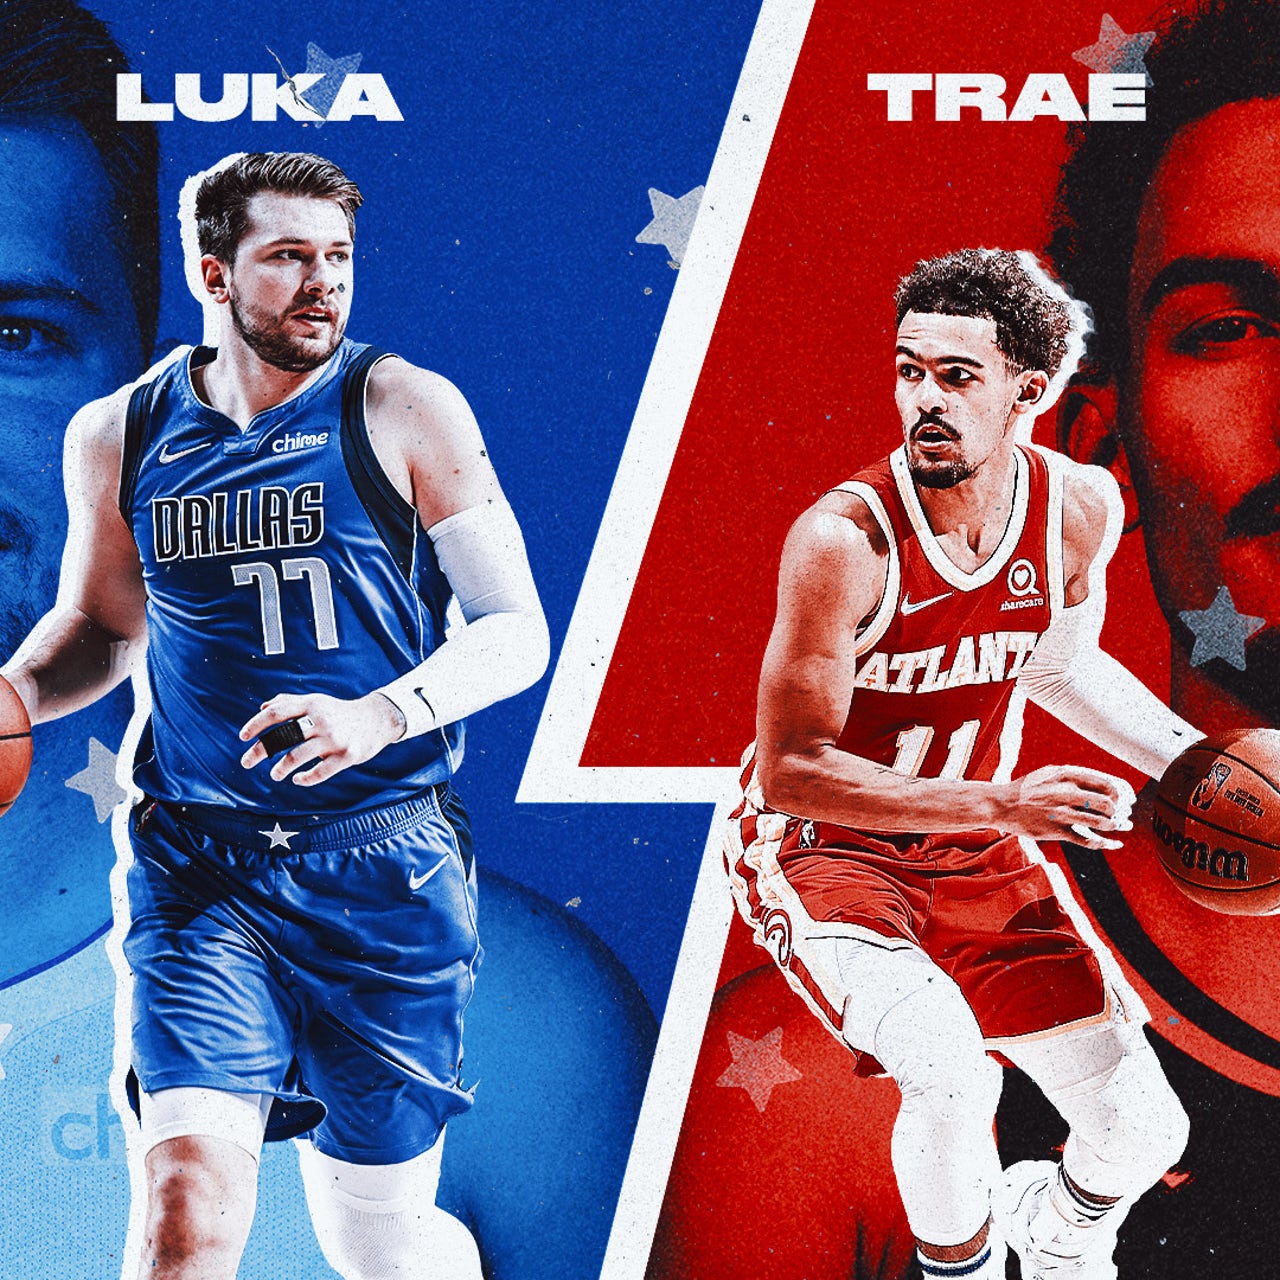 NBA news: All-Rookie first team, second team, full rosters, Luka Doncic,  Trae Young